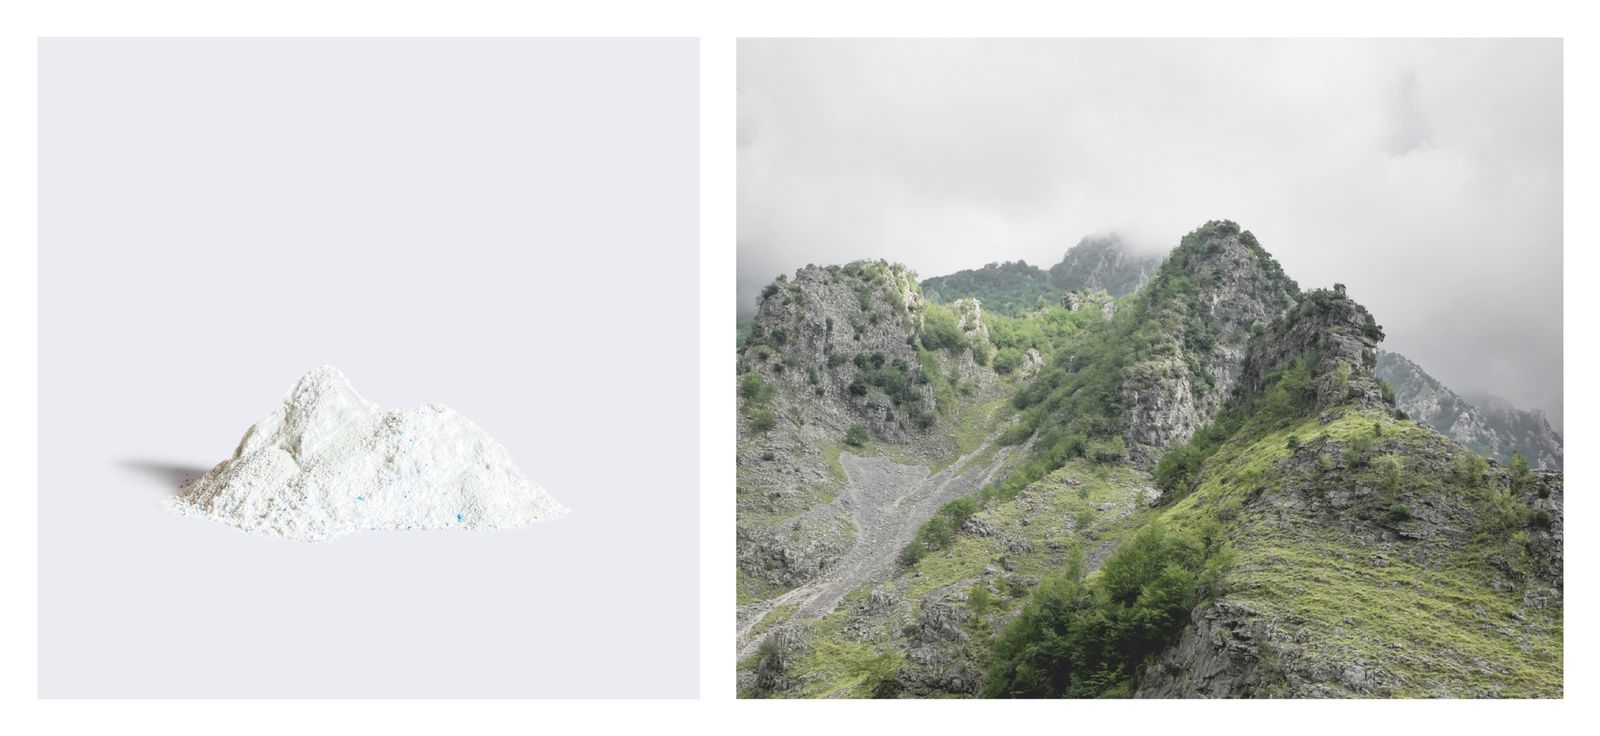 © Andrea Foligni - Image from the Apuan carbonate photography project